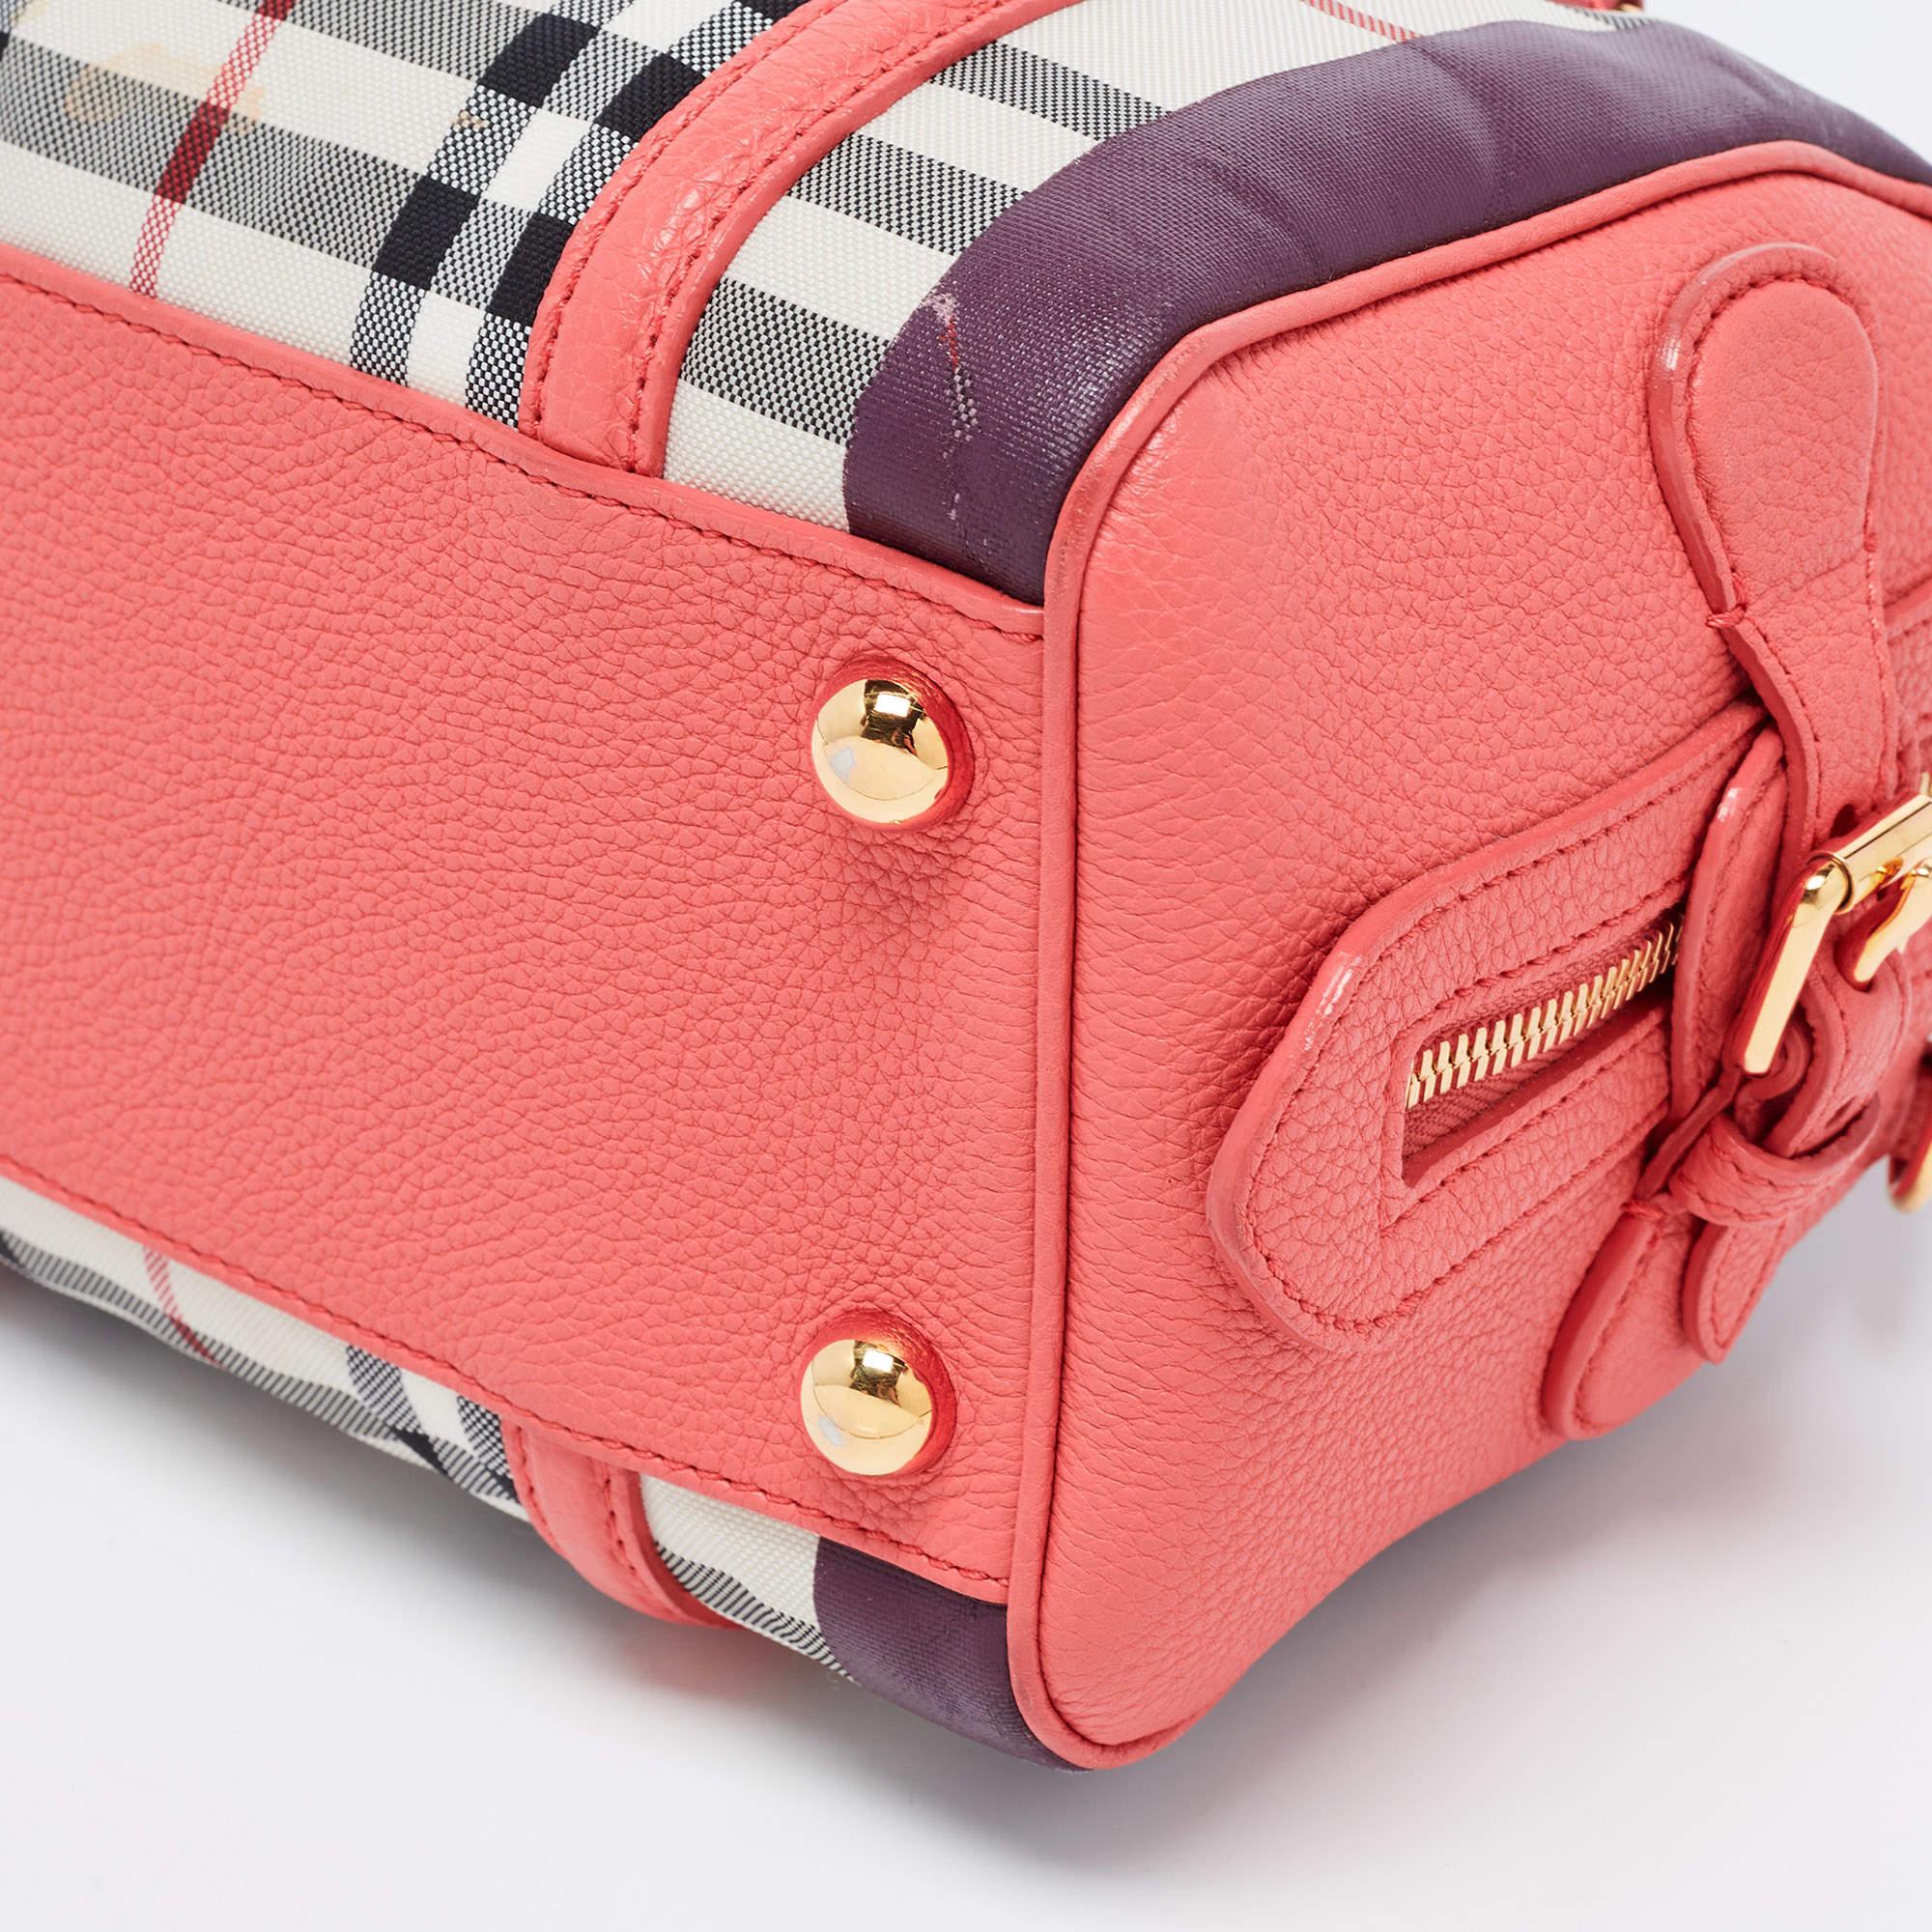 Burberry Prorsum Pink Haymarket Check Coated Canvas and Leather Mini Bee Bag 10